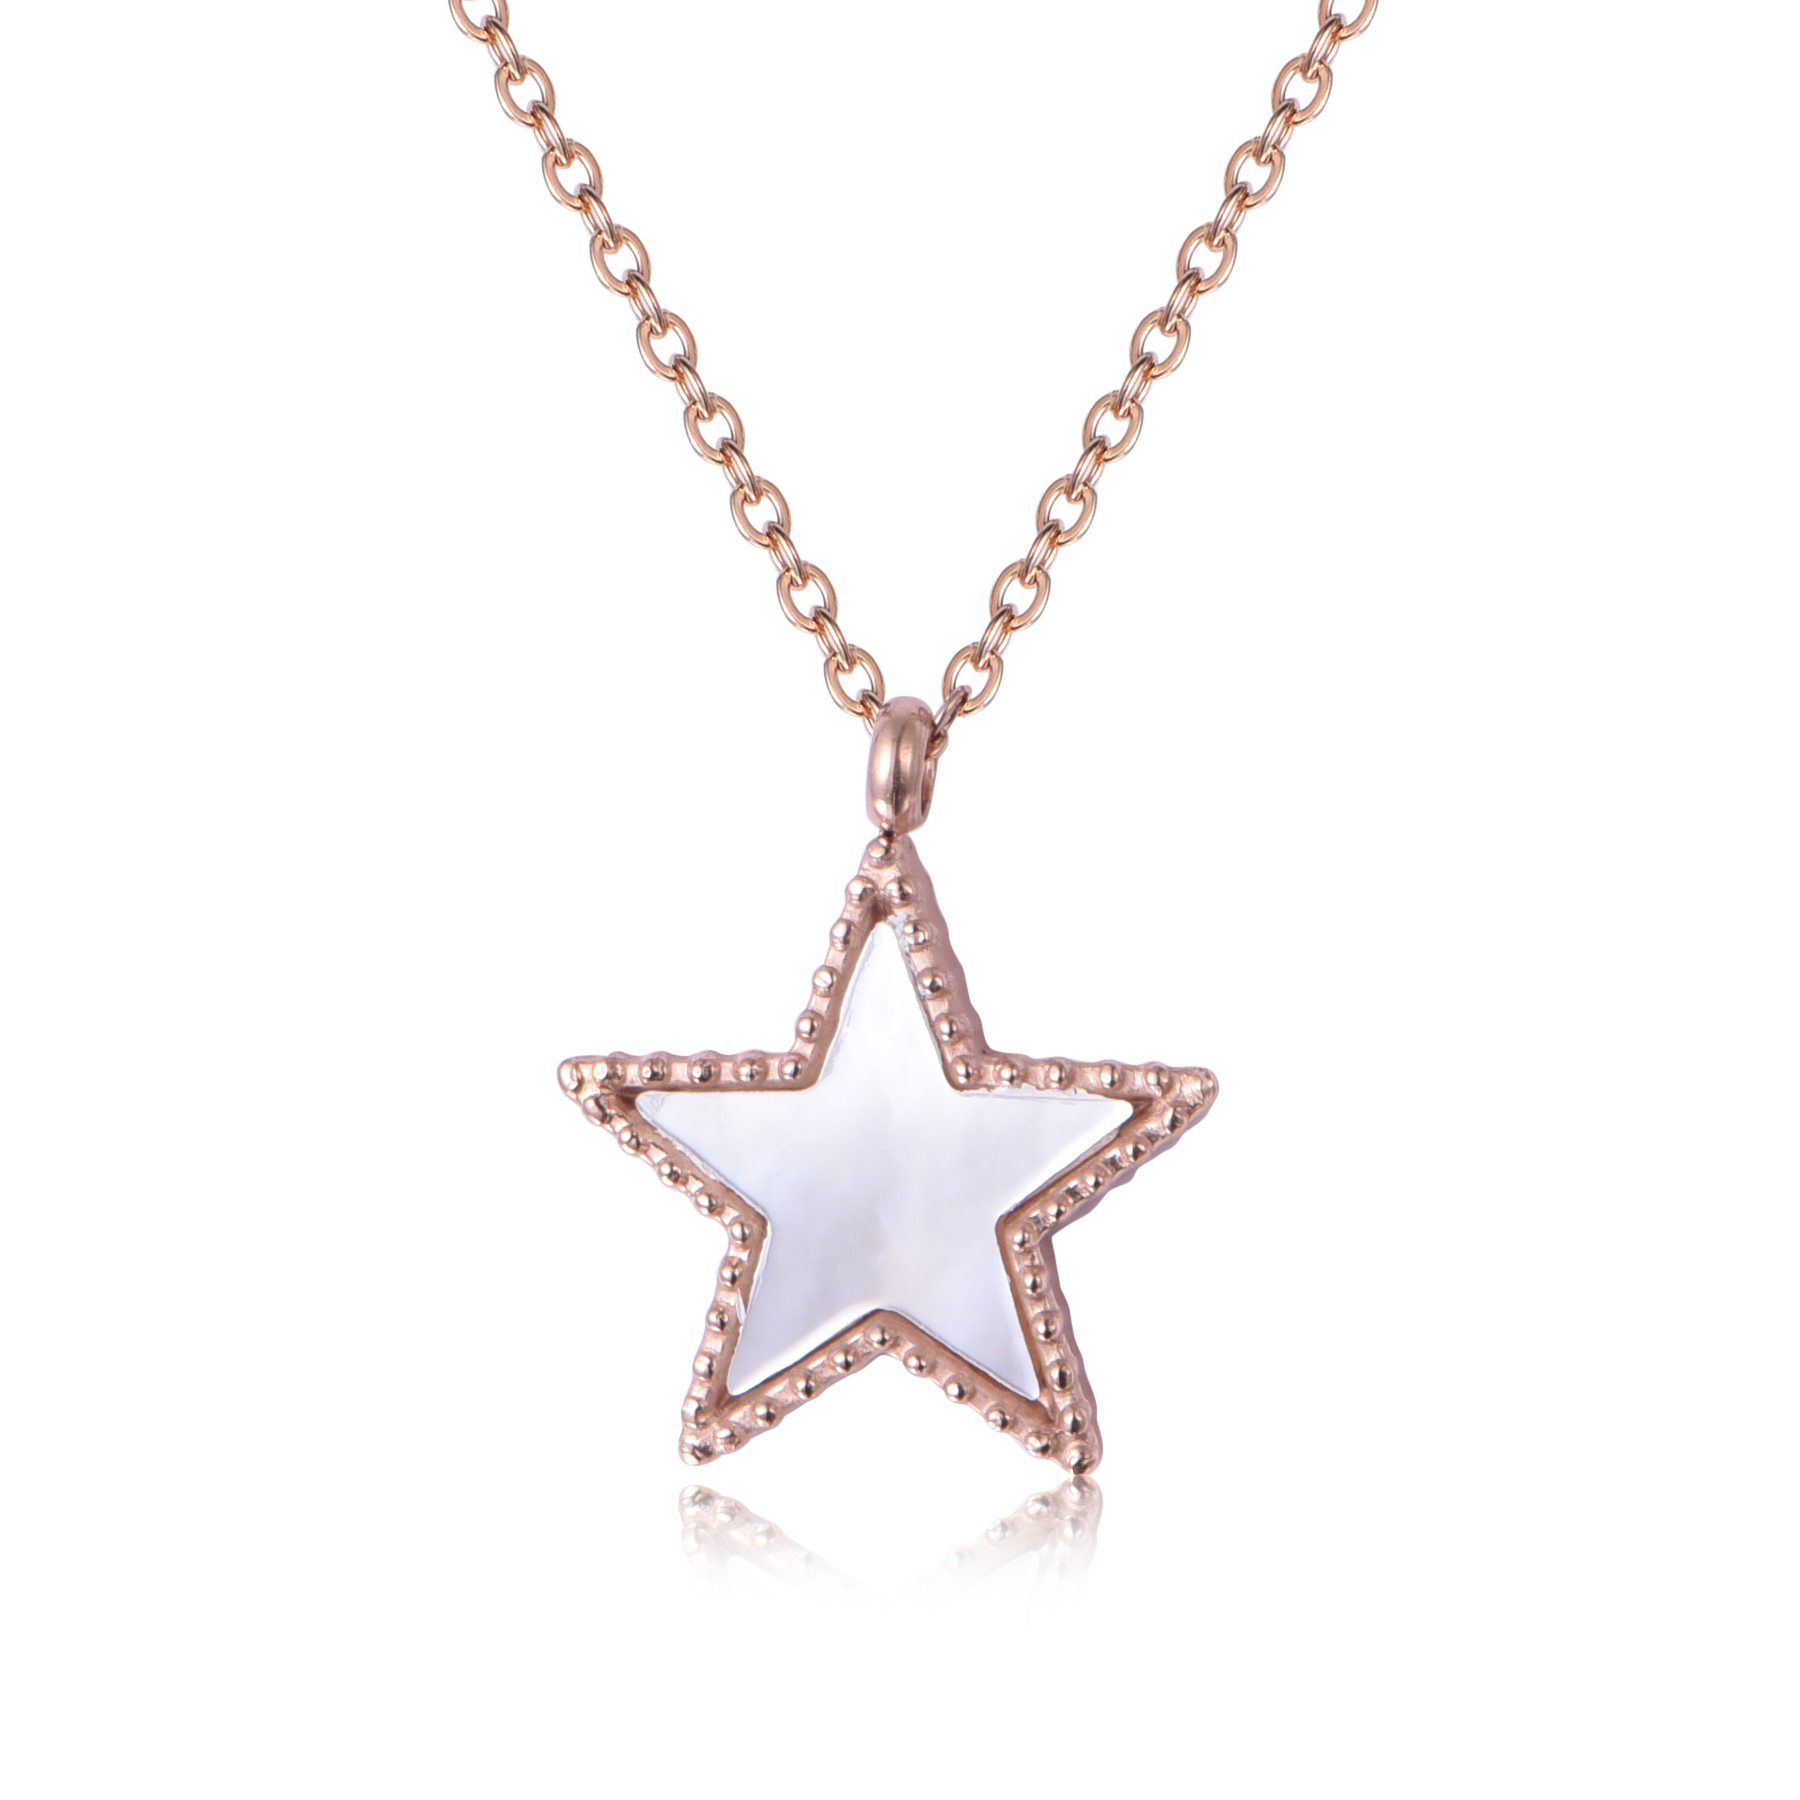 Stainless Steel Rose Gold Shell Starfish Necklace NR7-06